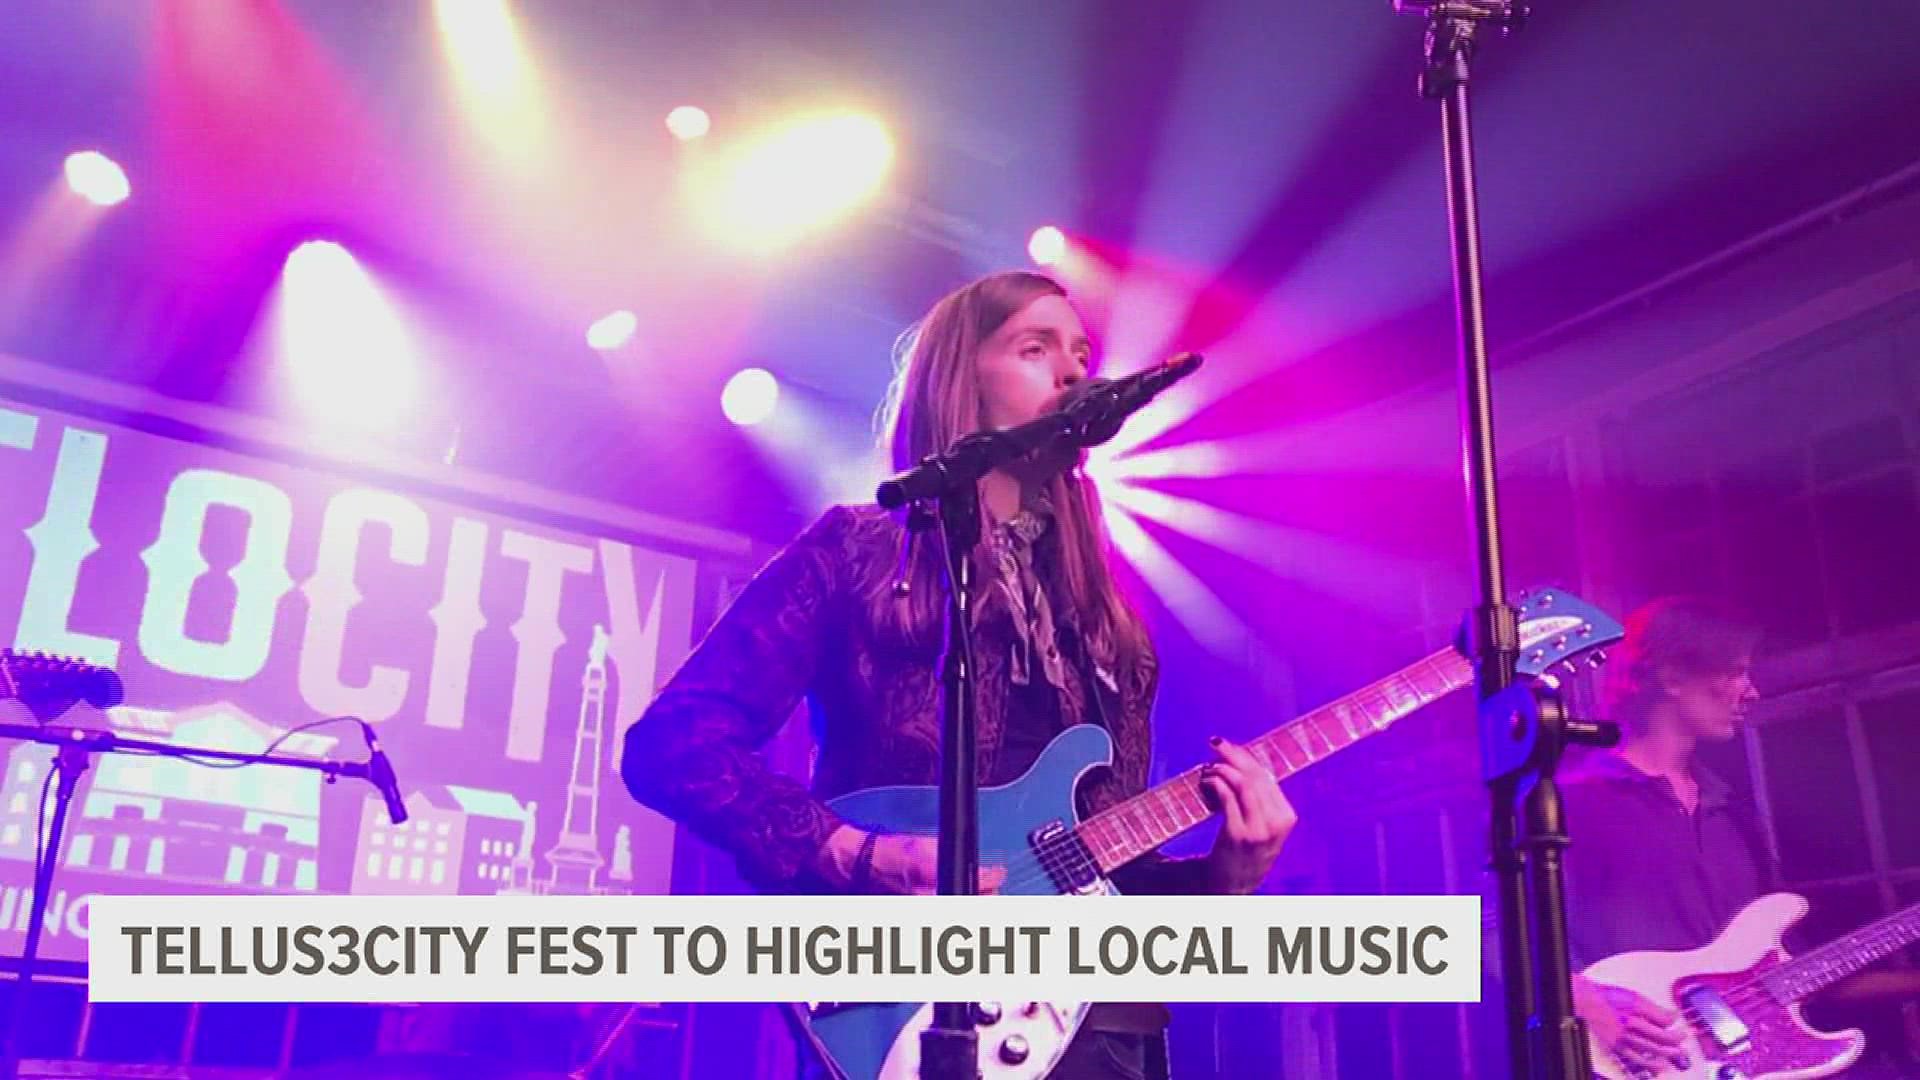 The three-day music festival showcasing over 50 local acts will feature bands like The Ocean Blue, The Scouts, The Nancy Reagans, Tiger & Thieves, and Witch Weather.